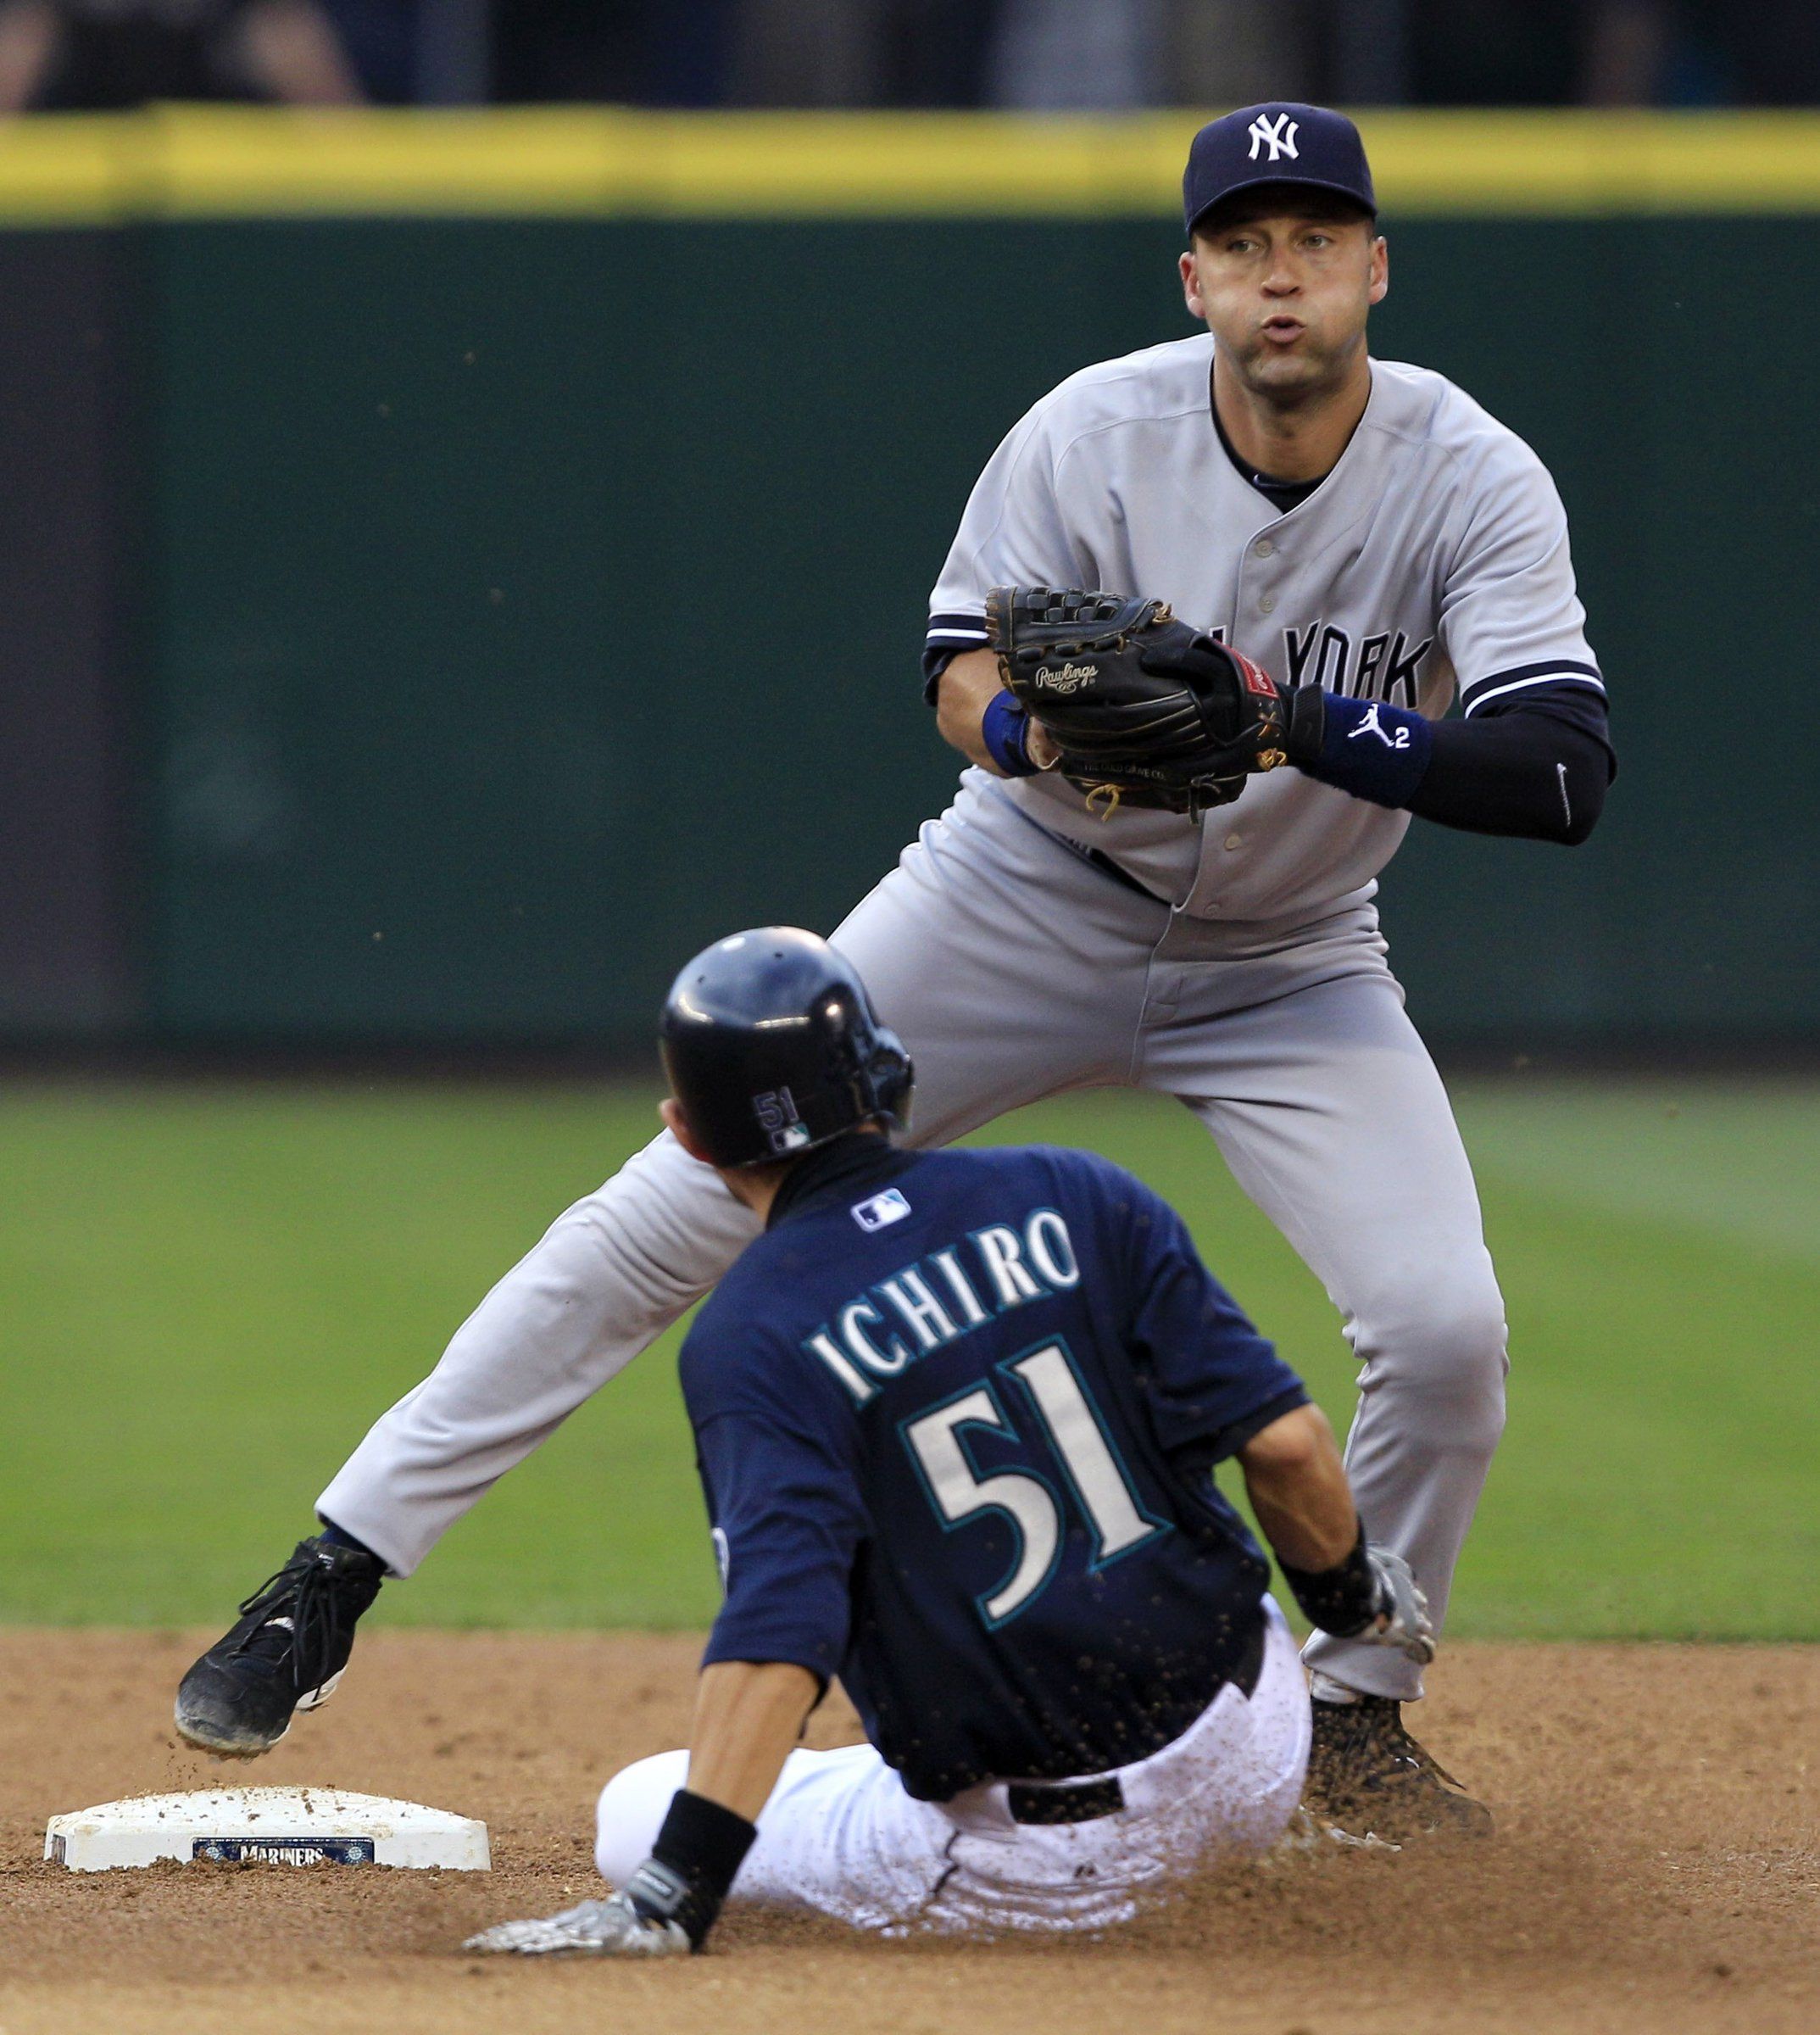 Derek Jeter on Ichiro: 'He's a guy who comes around once in a